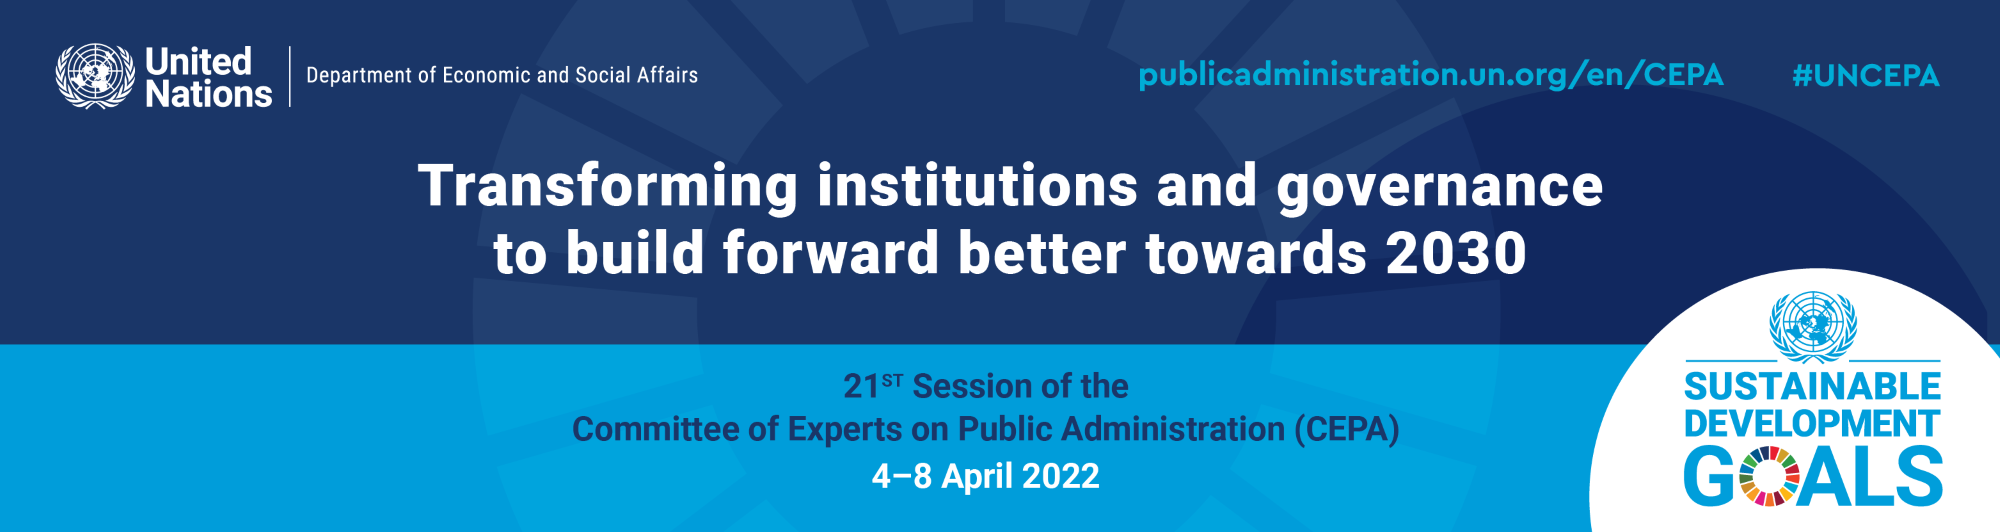 21st session of the Committee of Experts on Public Administration